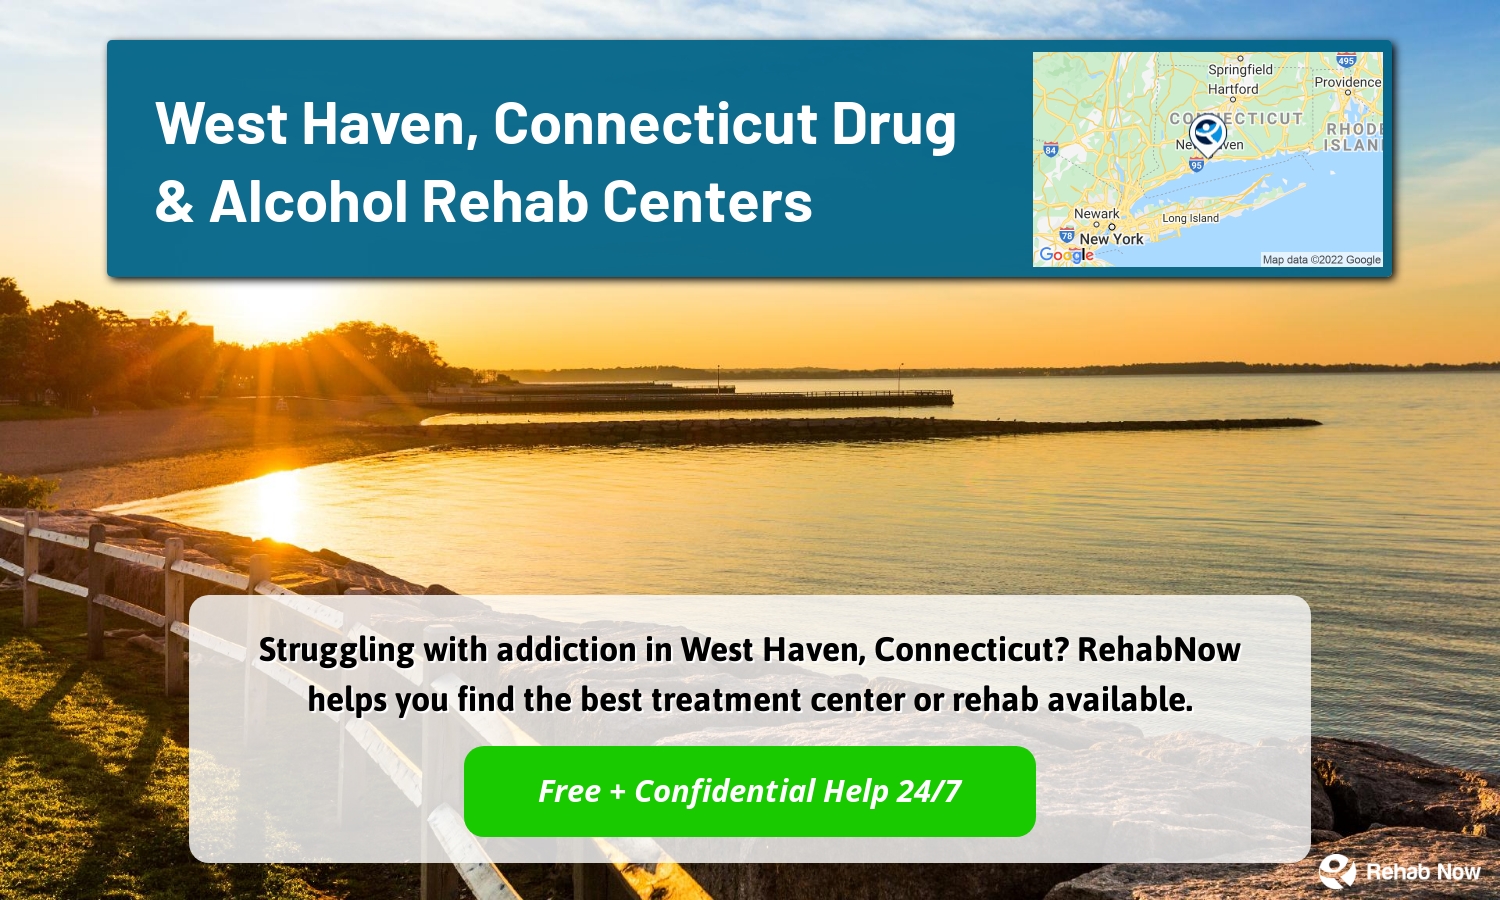 Struggling with addiction in West Haven, Connecticut? RehabNow helps you find the best treatment center or rehab available.